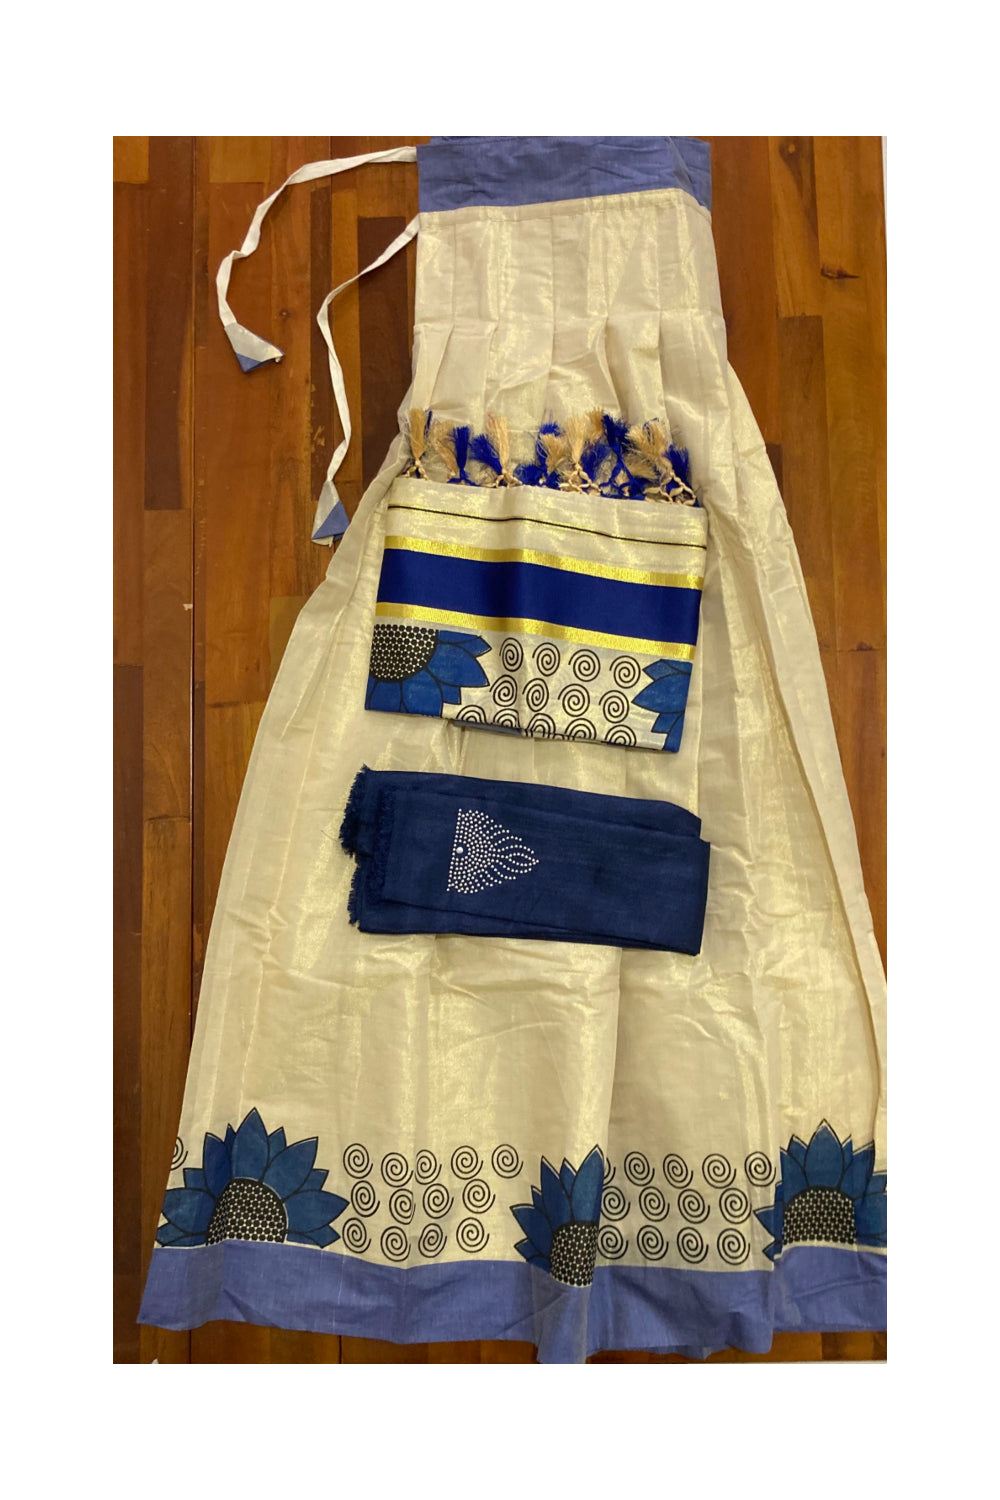 Kerala Tissue Stitched Dhavani Set with Blouse Piece and Neriyathu in with Blue Accents